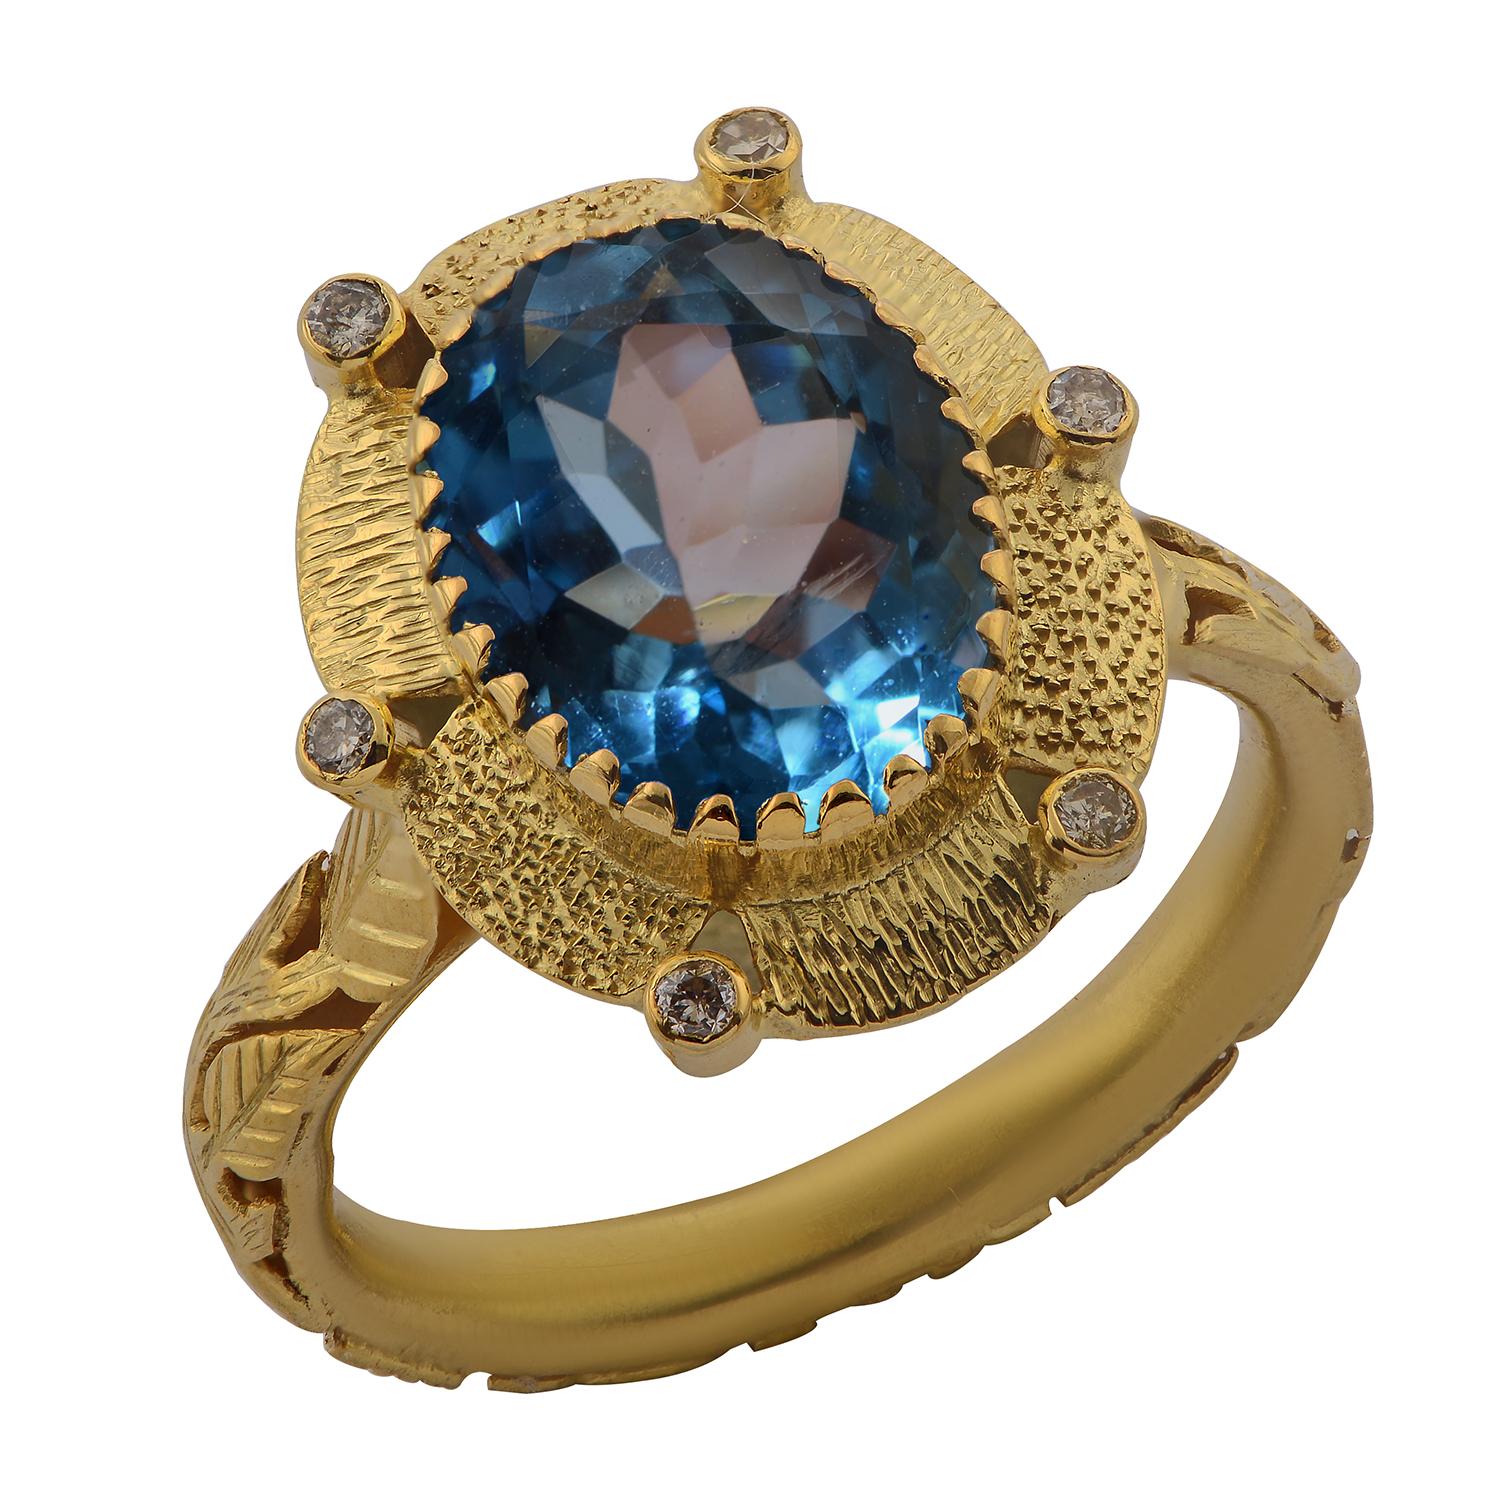 A striking one-of-a-kind blue topaz and diamond 18k gold cocktail ring. Handmade in our workshops, this ring features a 4.45 flawless blue topaz, which is flanked by six full cut diamonds set in exquisite hand-engraved 18k gold floral motifs.
The